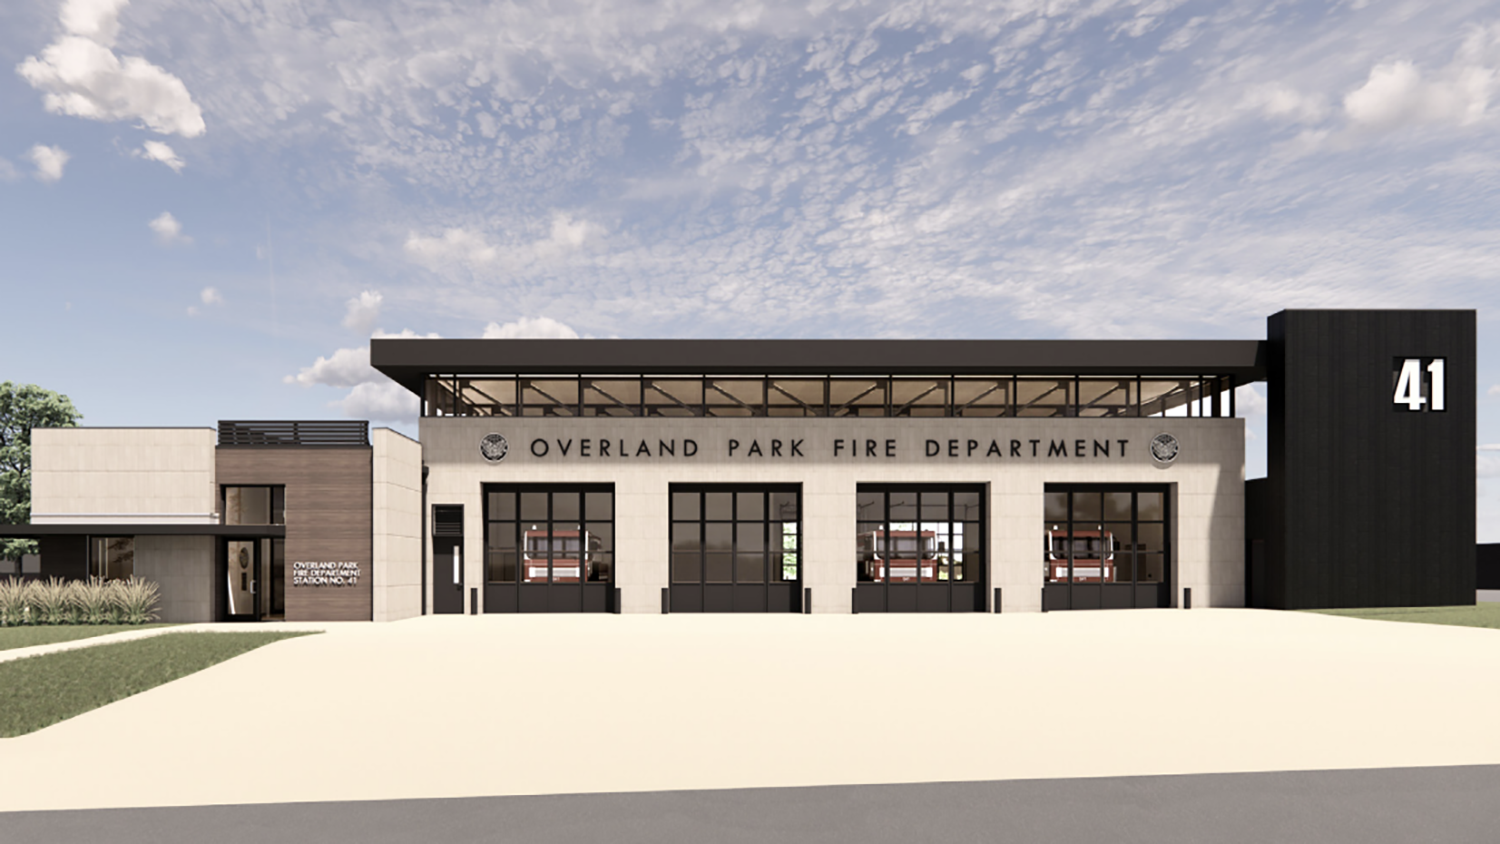 Rendering of the new Fire Station 41 front facade.